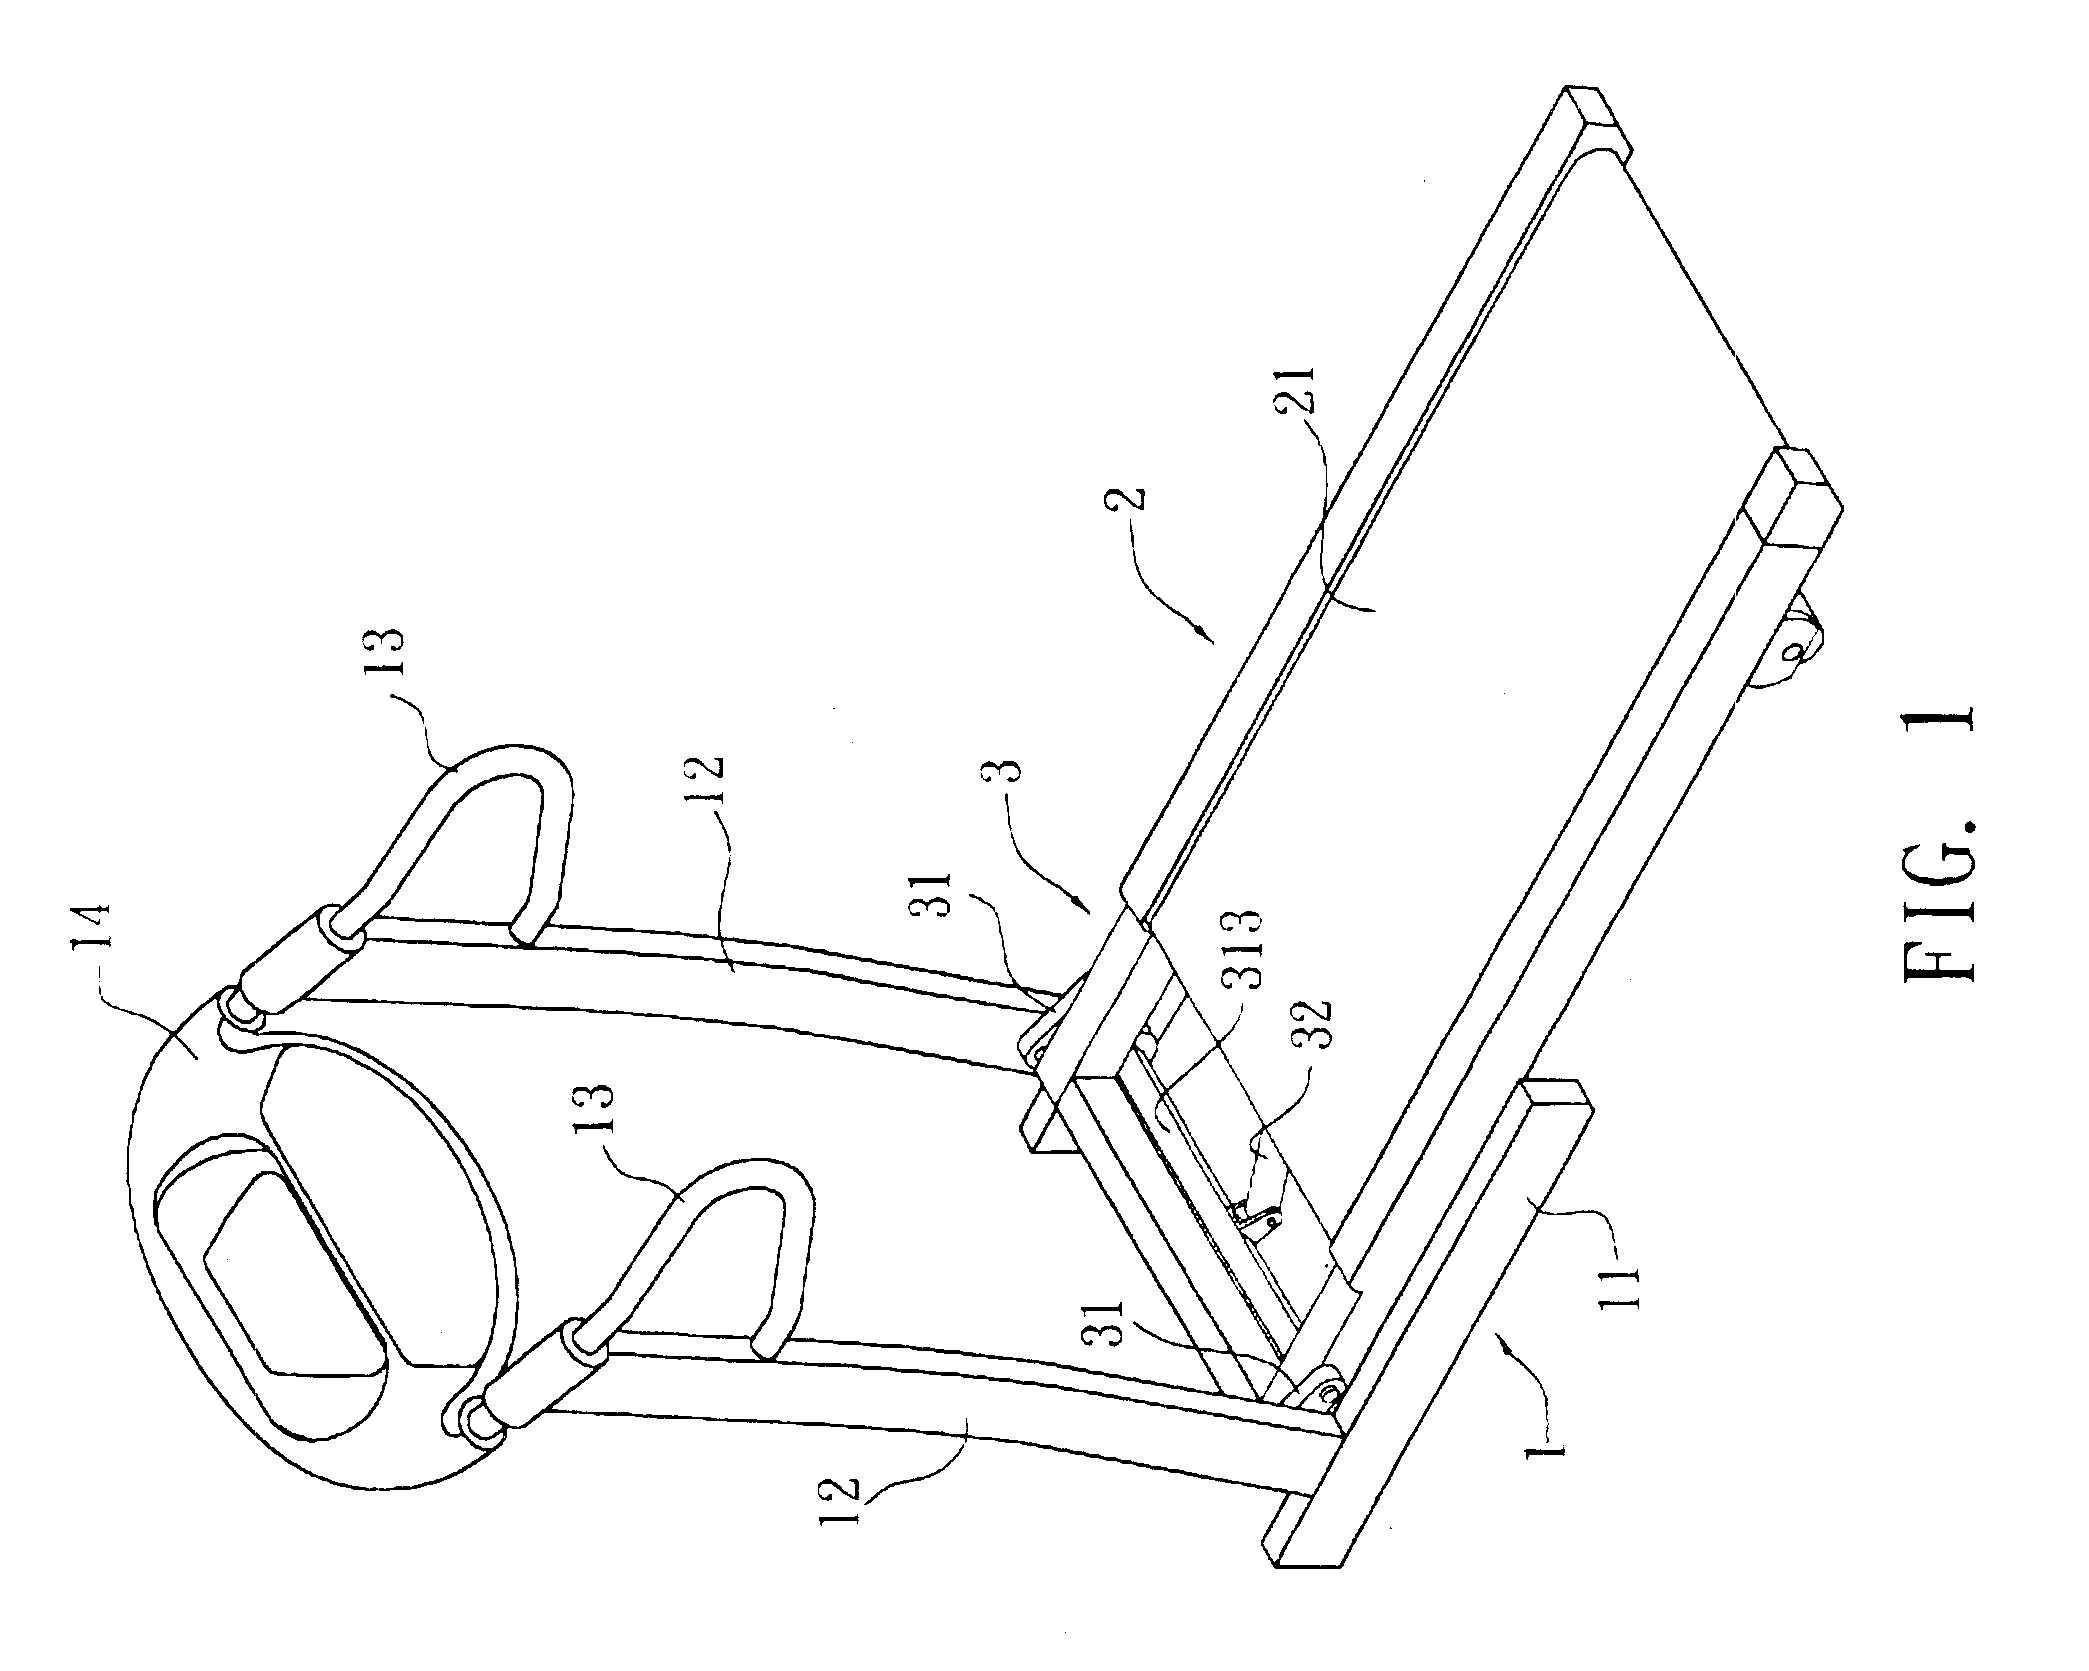 Gradient adjusting structure of a treadmill